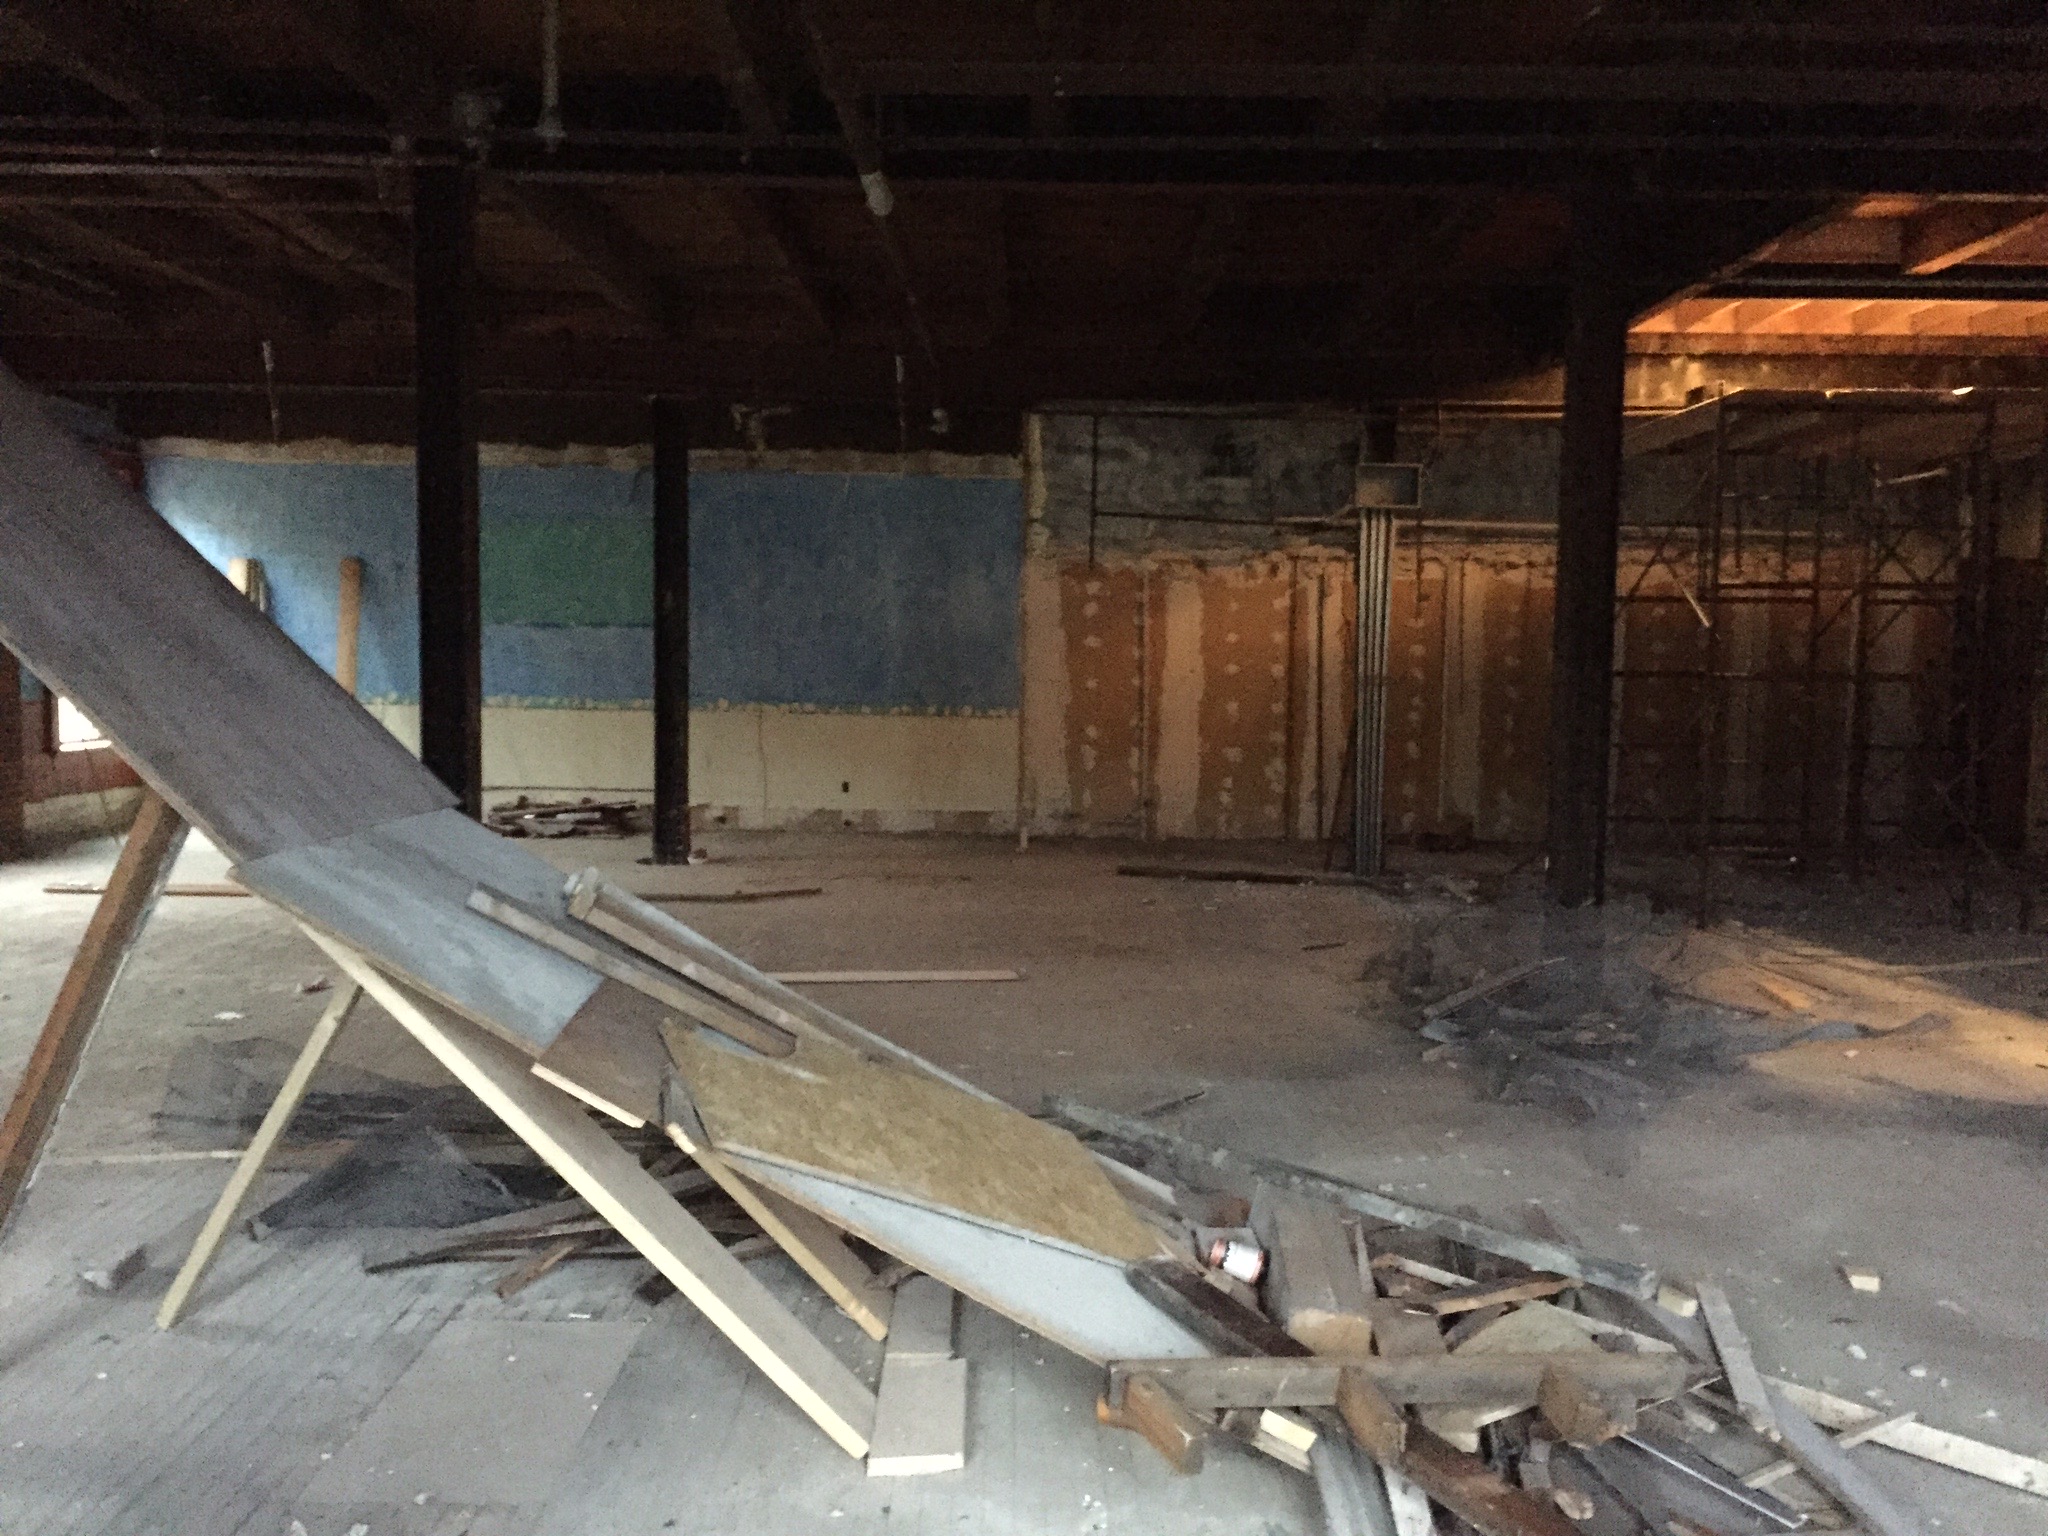 A gutted floor of a building, apprpoximately 60ft wide and just as deep, with some support I-beams throughout. There's a pile of wood scraps in the middle of the space that looks like a ramp, possibly for sliding debris down from a higher floor